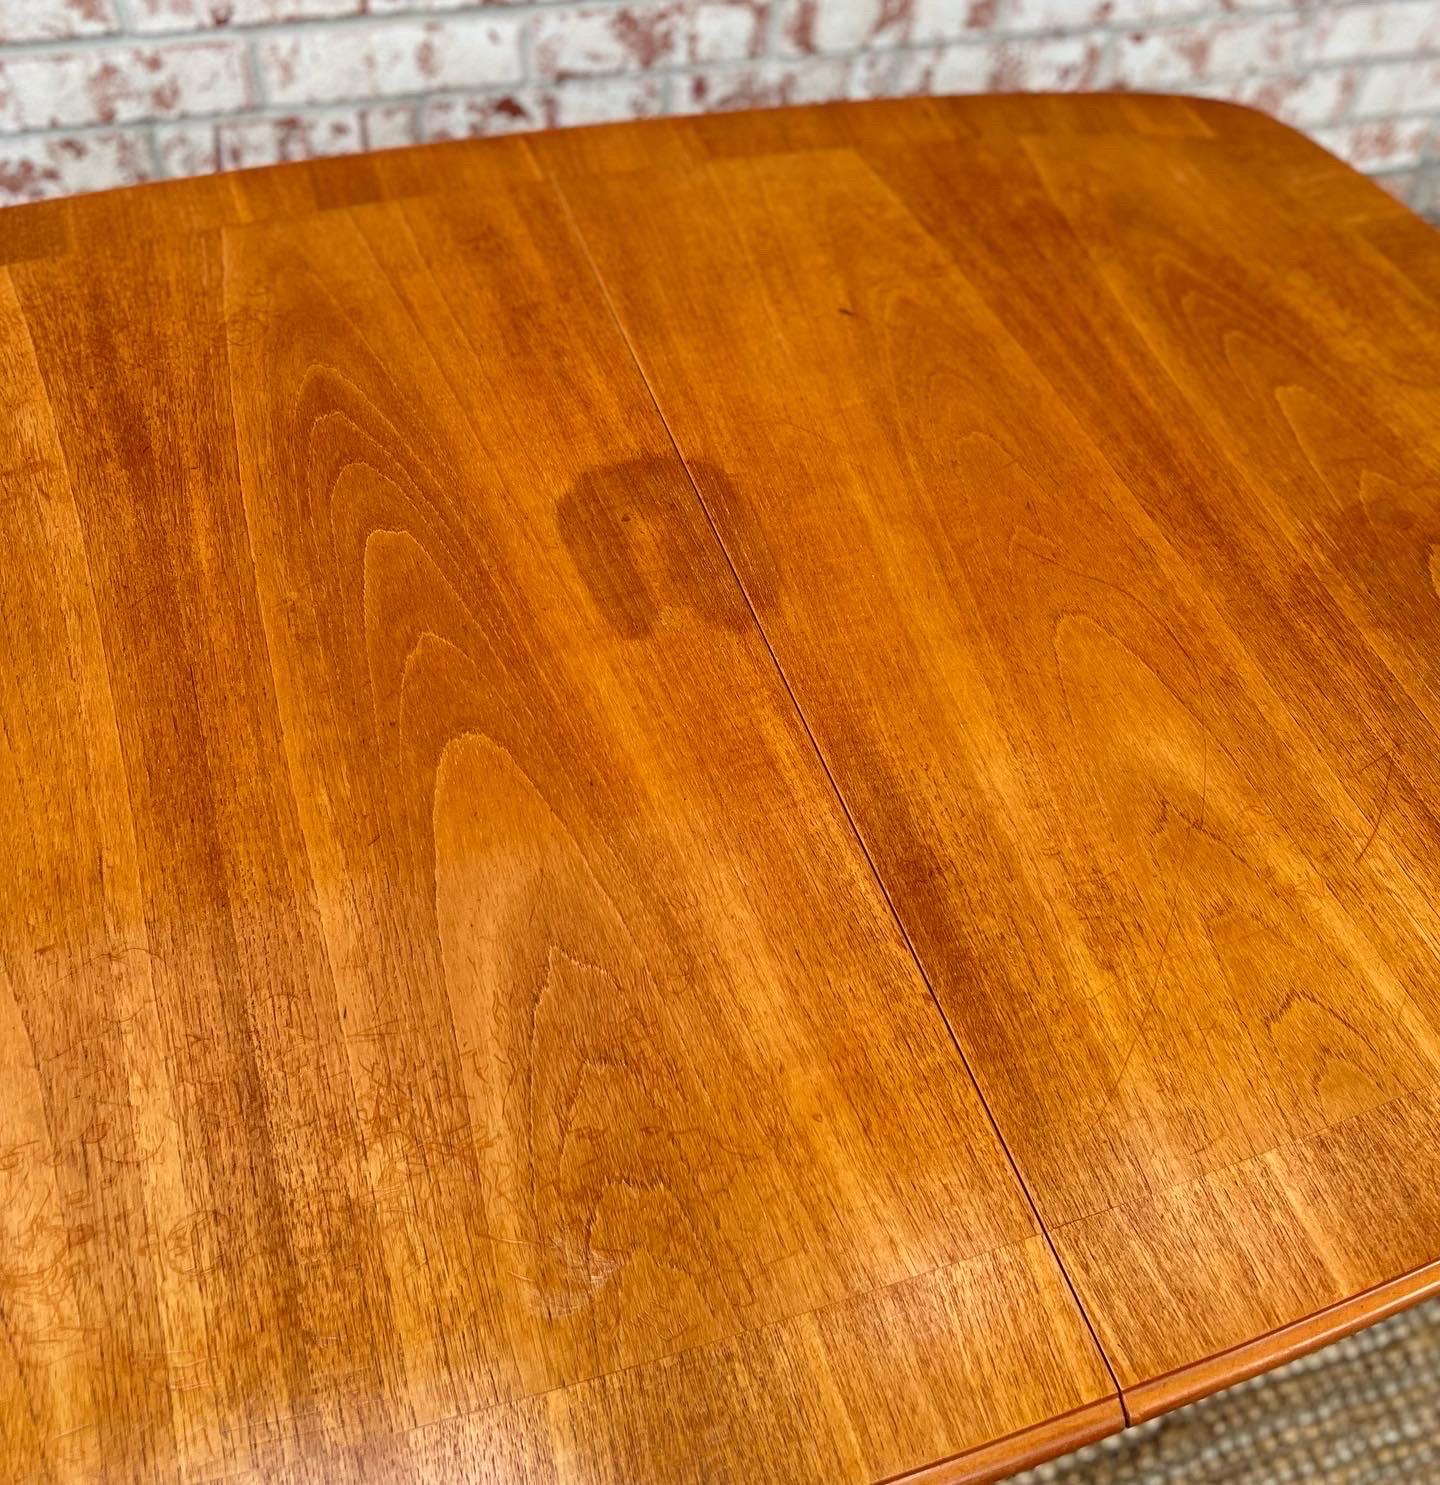 Gorgeous unique mid century dining table by McIntosh. Leaf pops up from under the table, and it’s very convenient. Some discoloration and marks on the top. Legs in good sturdy condition!
  